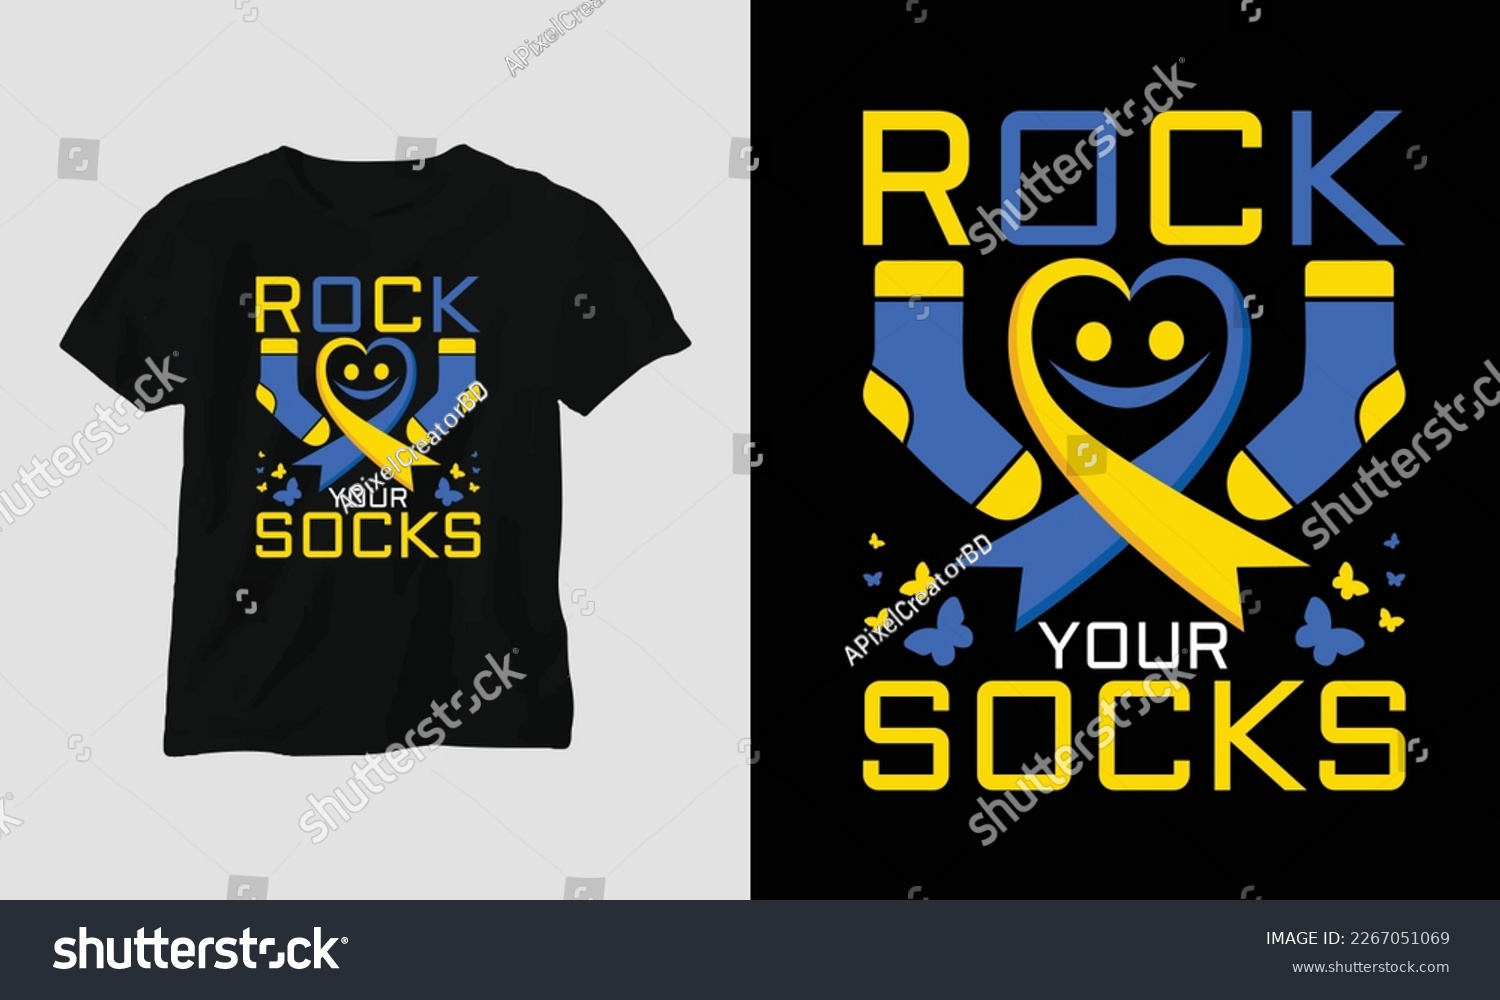 SVG of Down syndrome t-shirt and apparel design. Vector print, typography, poster, emblem, festival  svg